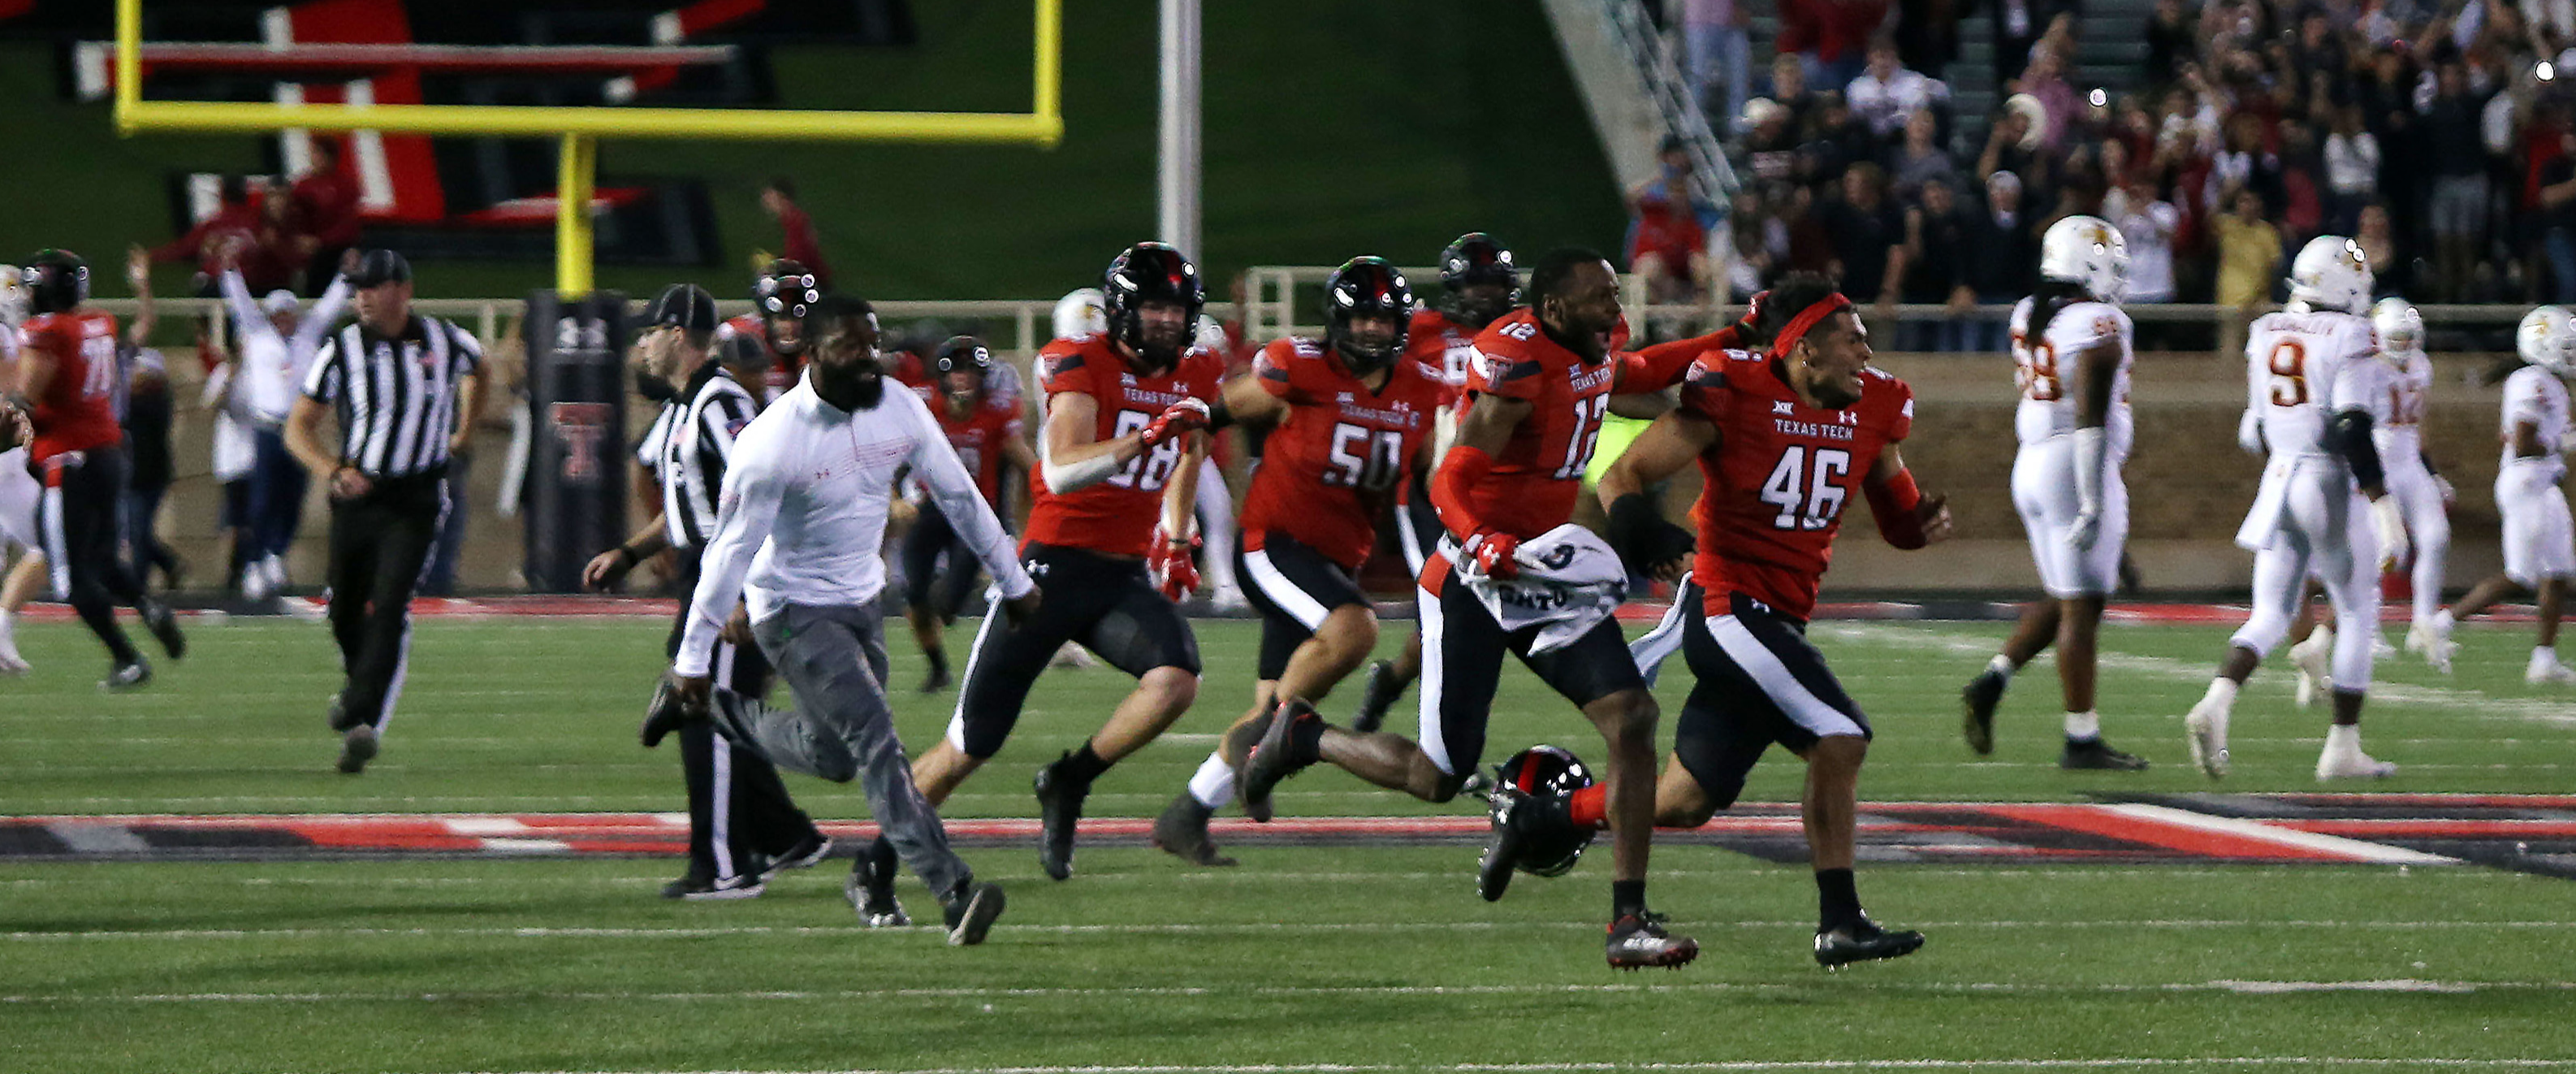 The Texas Tech radio broadcast crew has been suspended for criticizing the referees